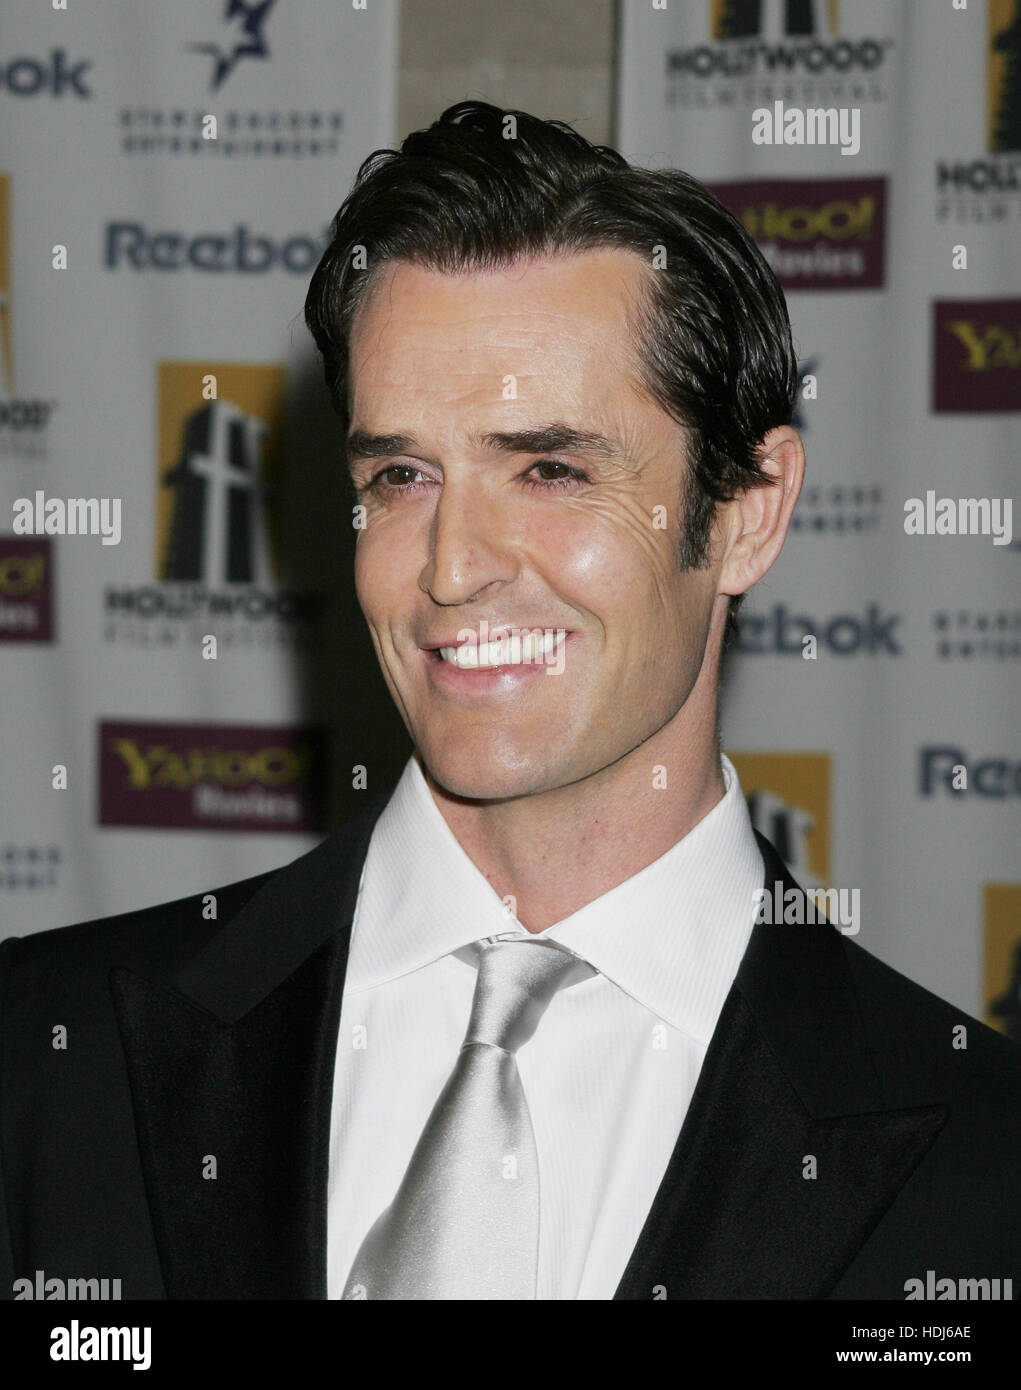 Rupert Everett at the 8th Annual Hollywood Film Festival Hollywood Awards Gala Ceremony on October 18, 2004 in Beverly Hills, California. Photo credit: Francis Specker Stock Photo